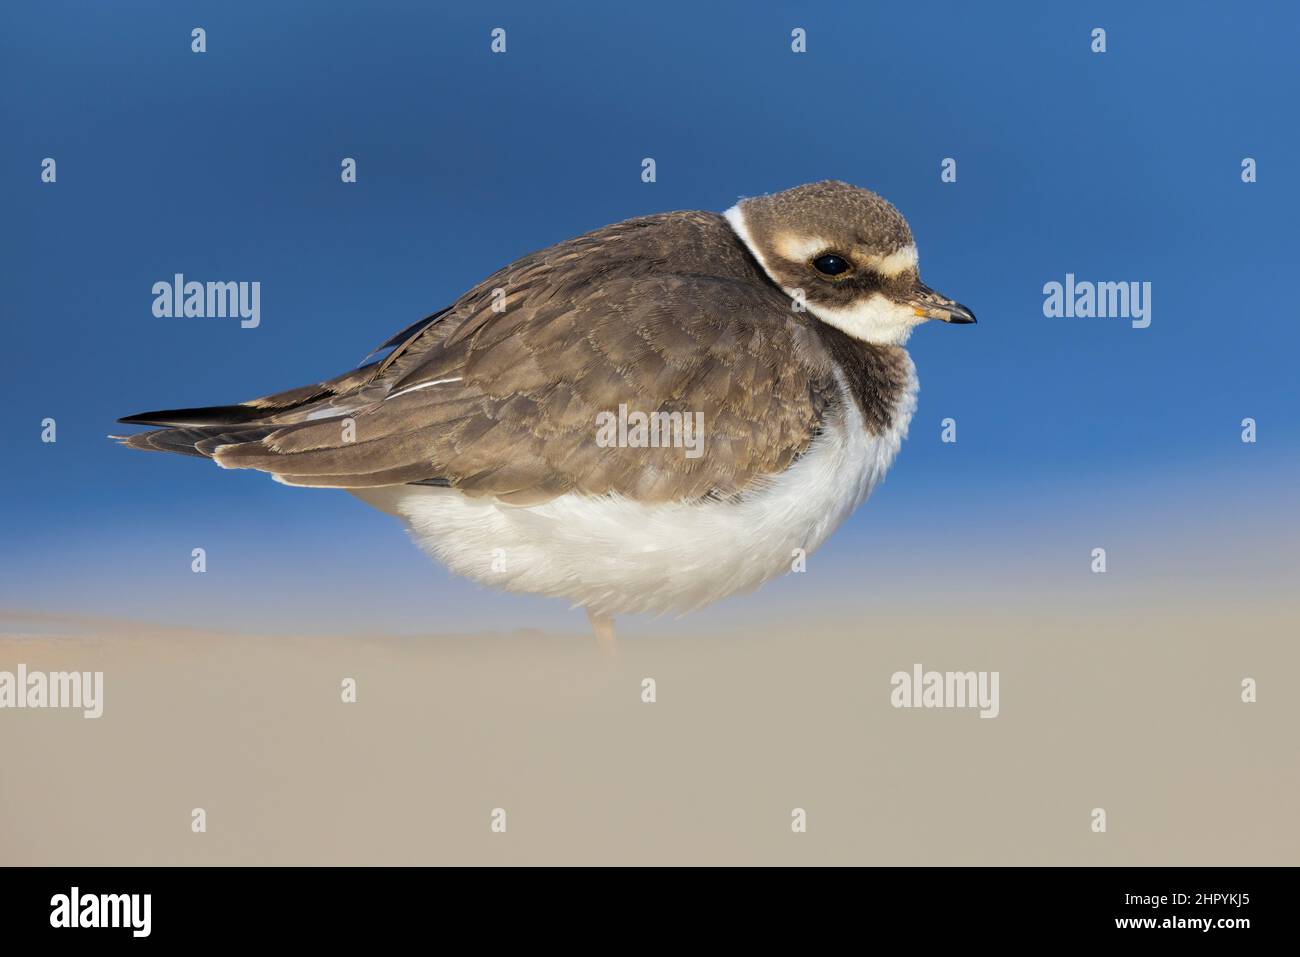 Ringed Plover (Charadrius hiaticula), side view of a juvenile standing on the sand, Campania, Italy Stock Photo